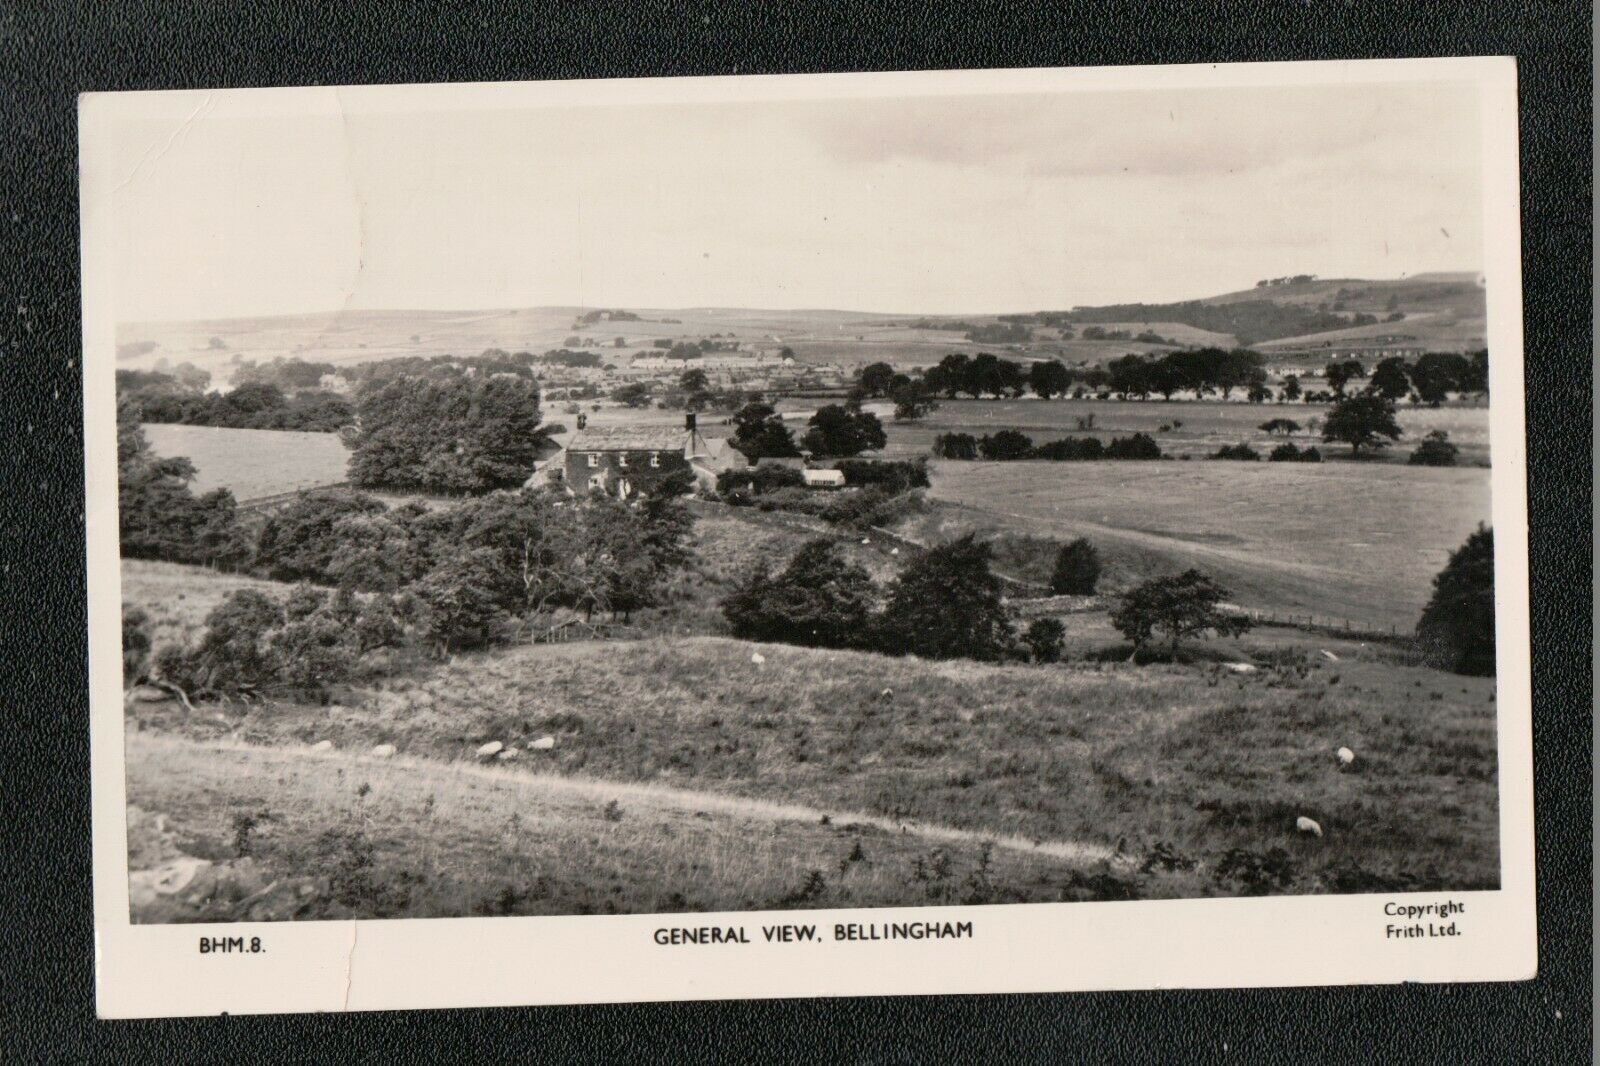 House Clearance - General View Bellingham 1950's F Frith Service ~ Northumberland